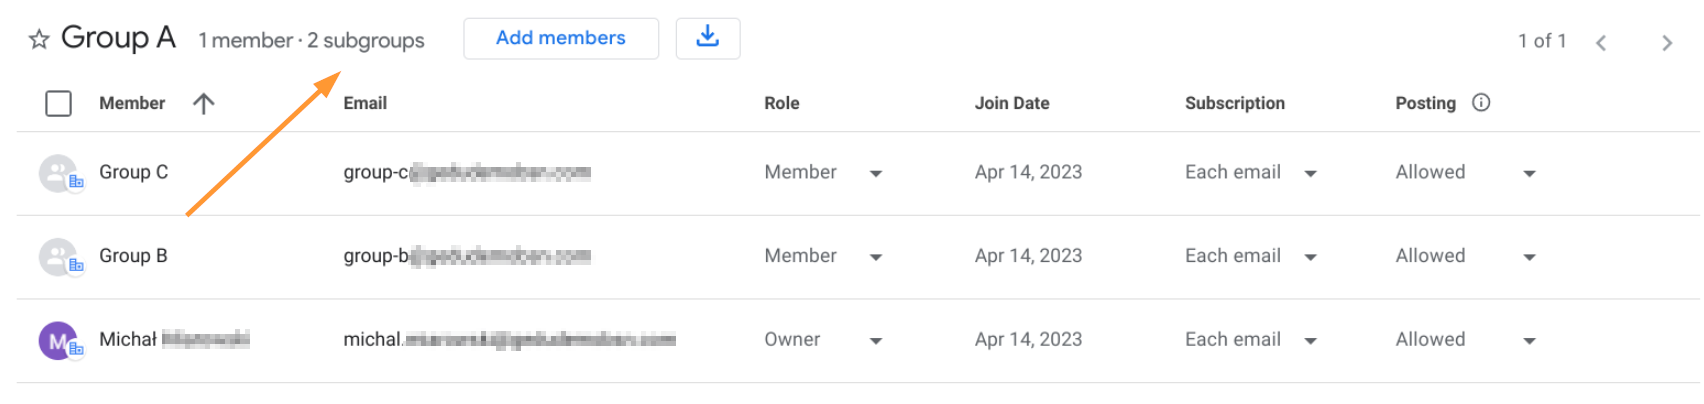 Subgroups in a Google group